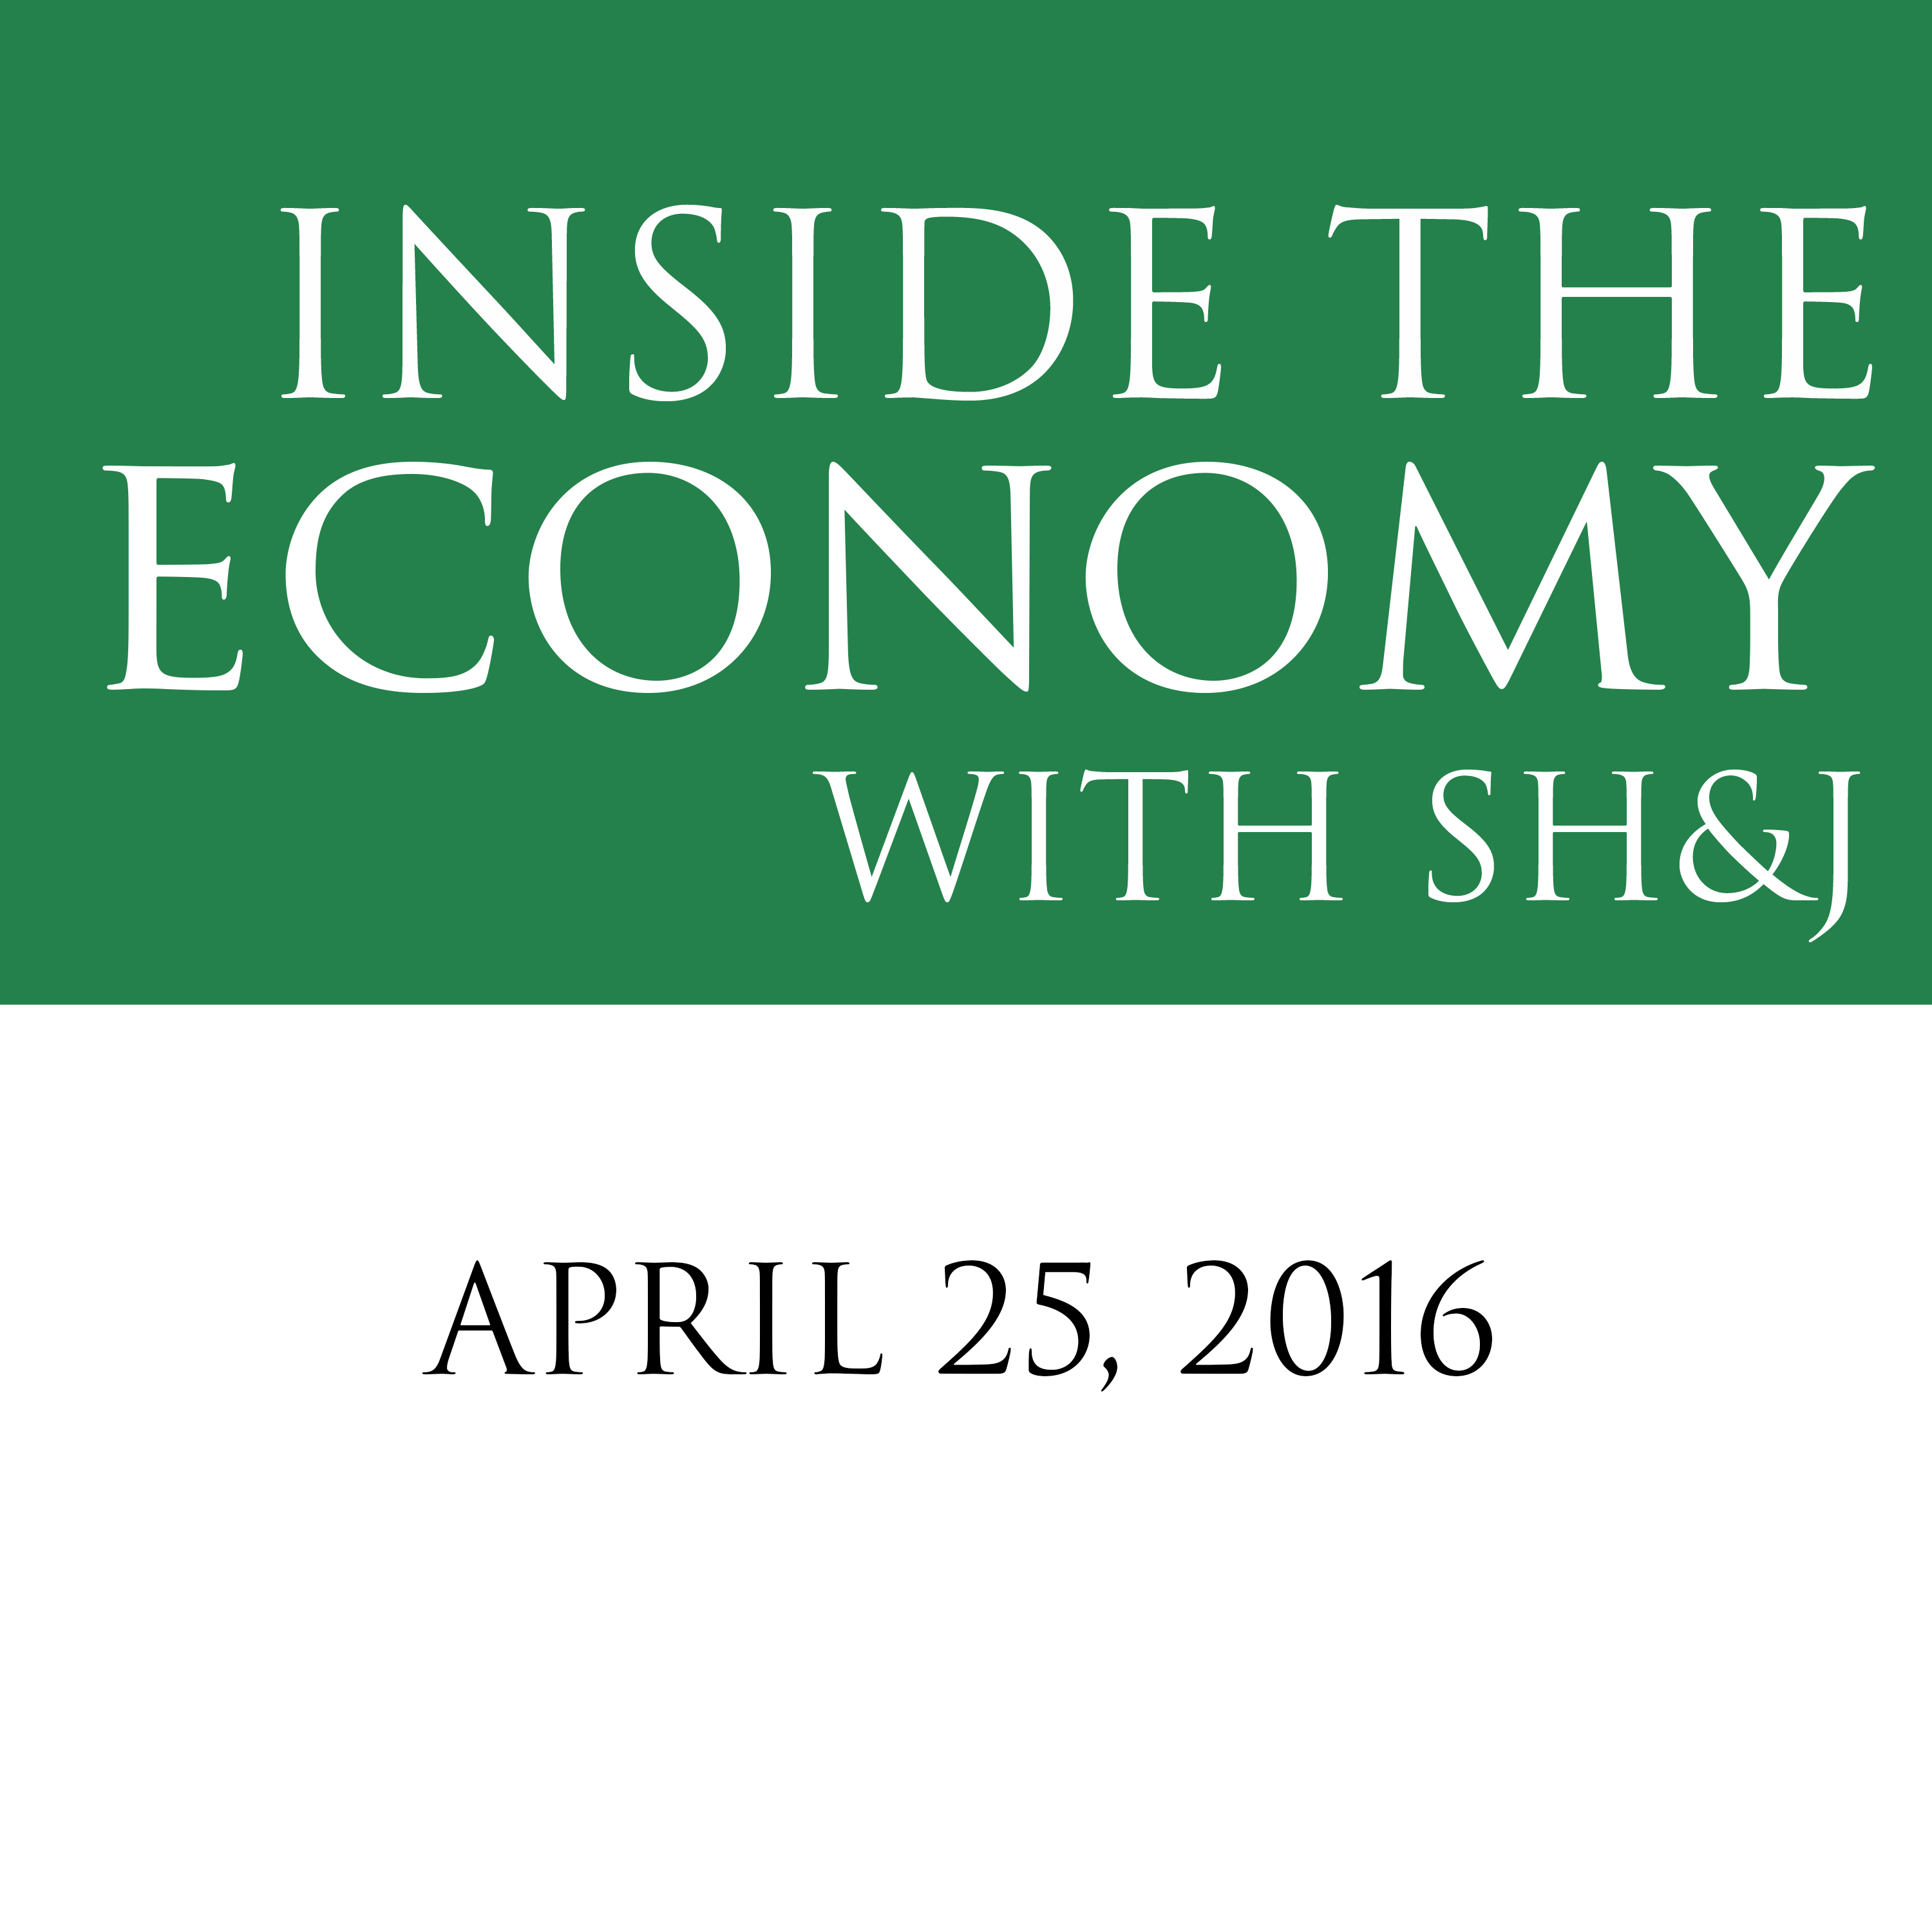 April 25, 2016  --  Inside the Economy With SH&J